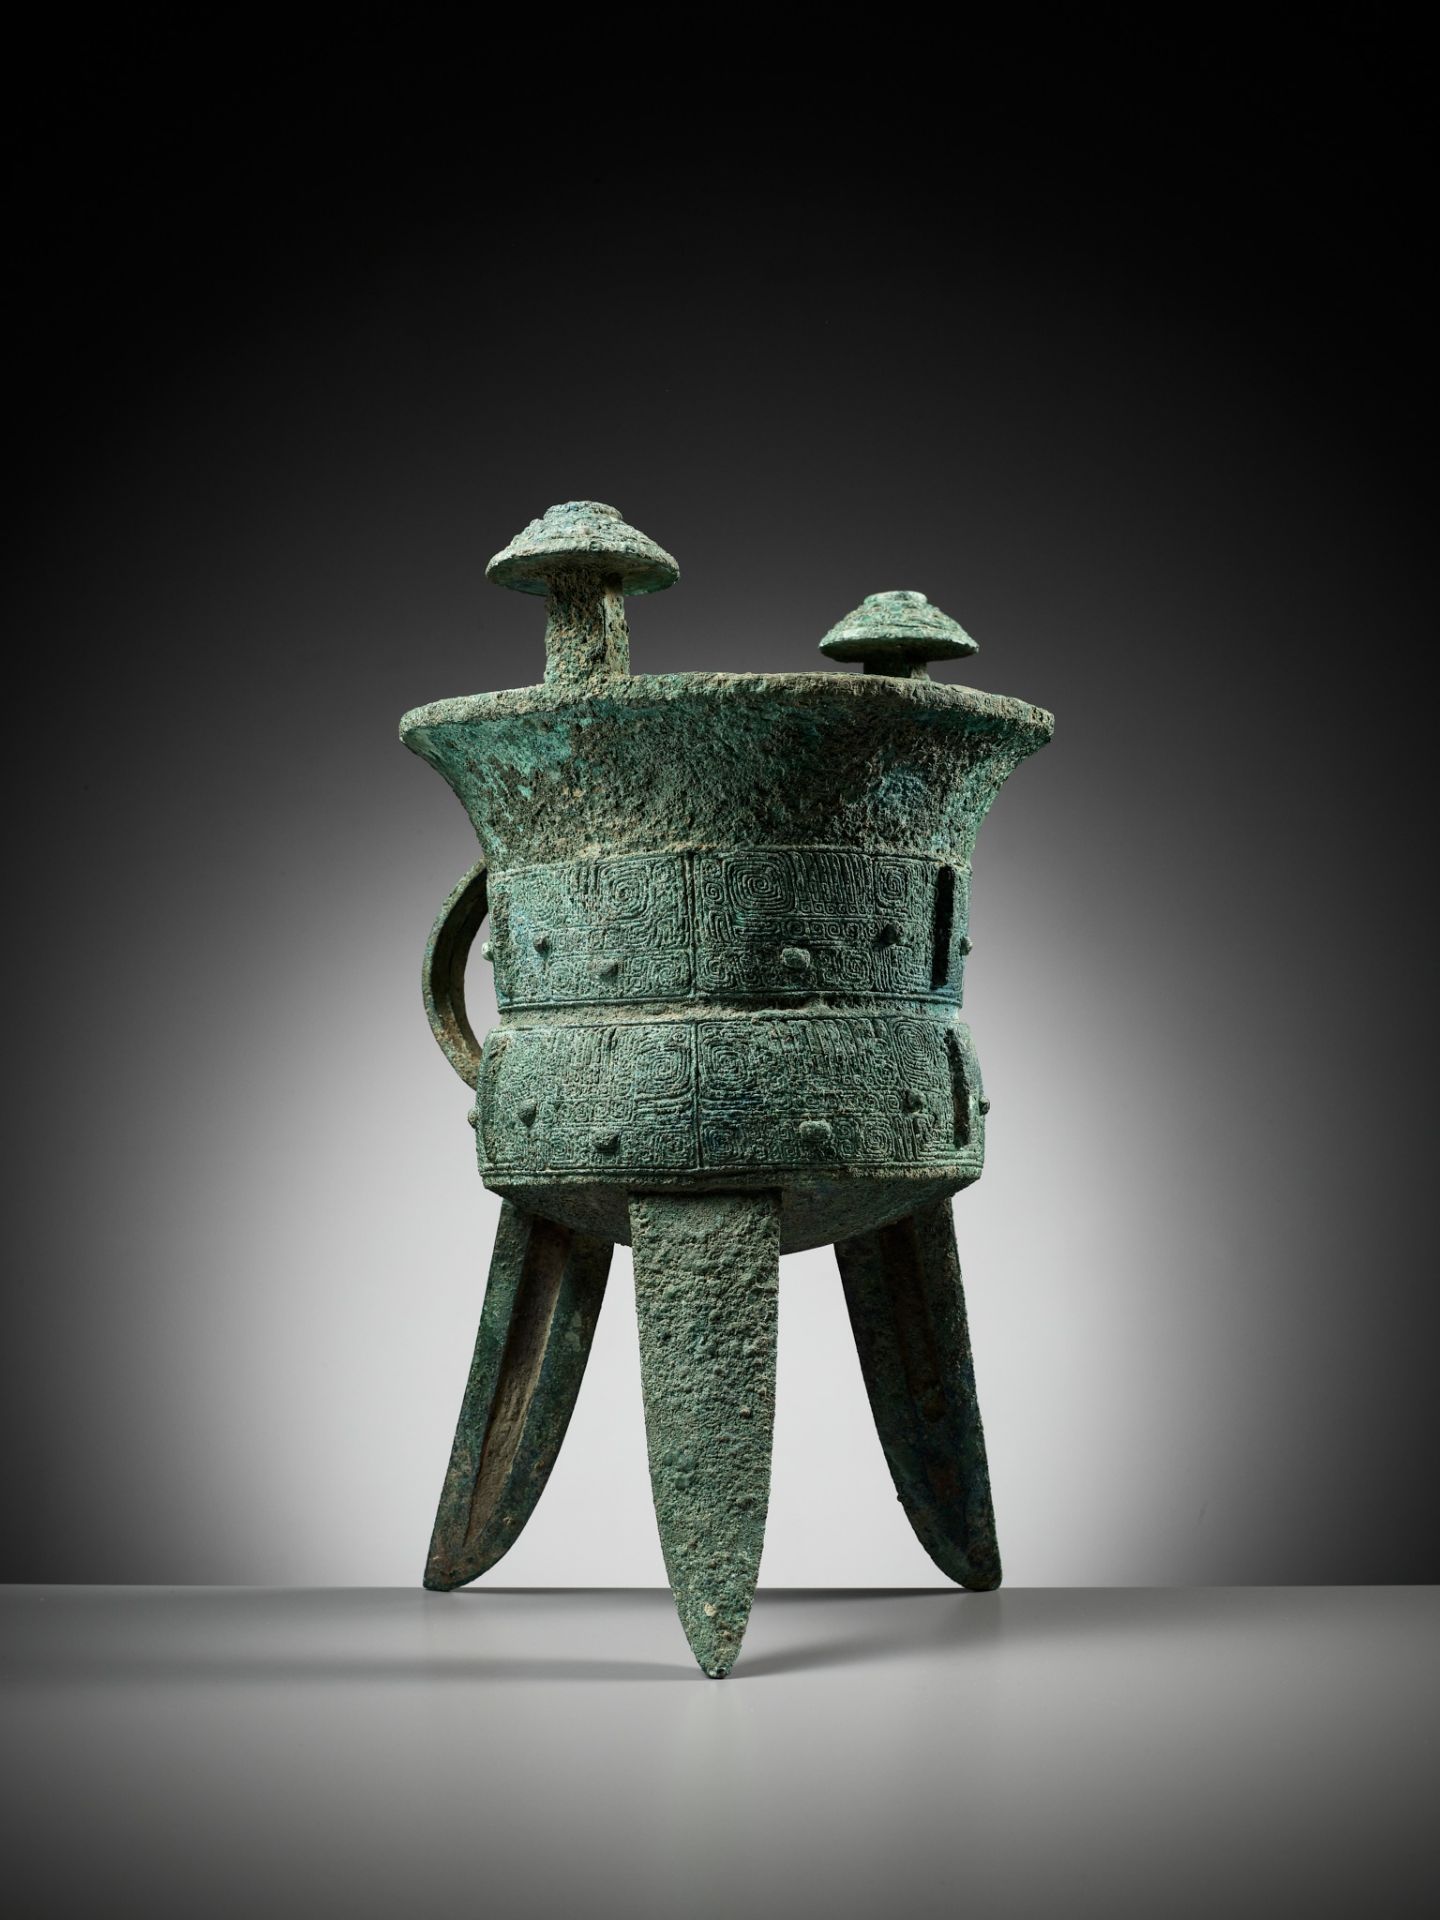 AN EXCEPTIONALLY LARGE AND MASSIVE BRONZE RITUAL TRIPOD WINE VESSEL, JIA, WITH A CLAN MARK, SHANG - Image 18 of 29